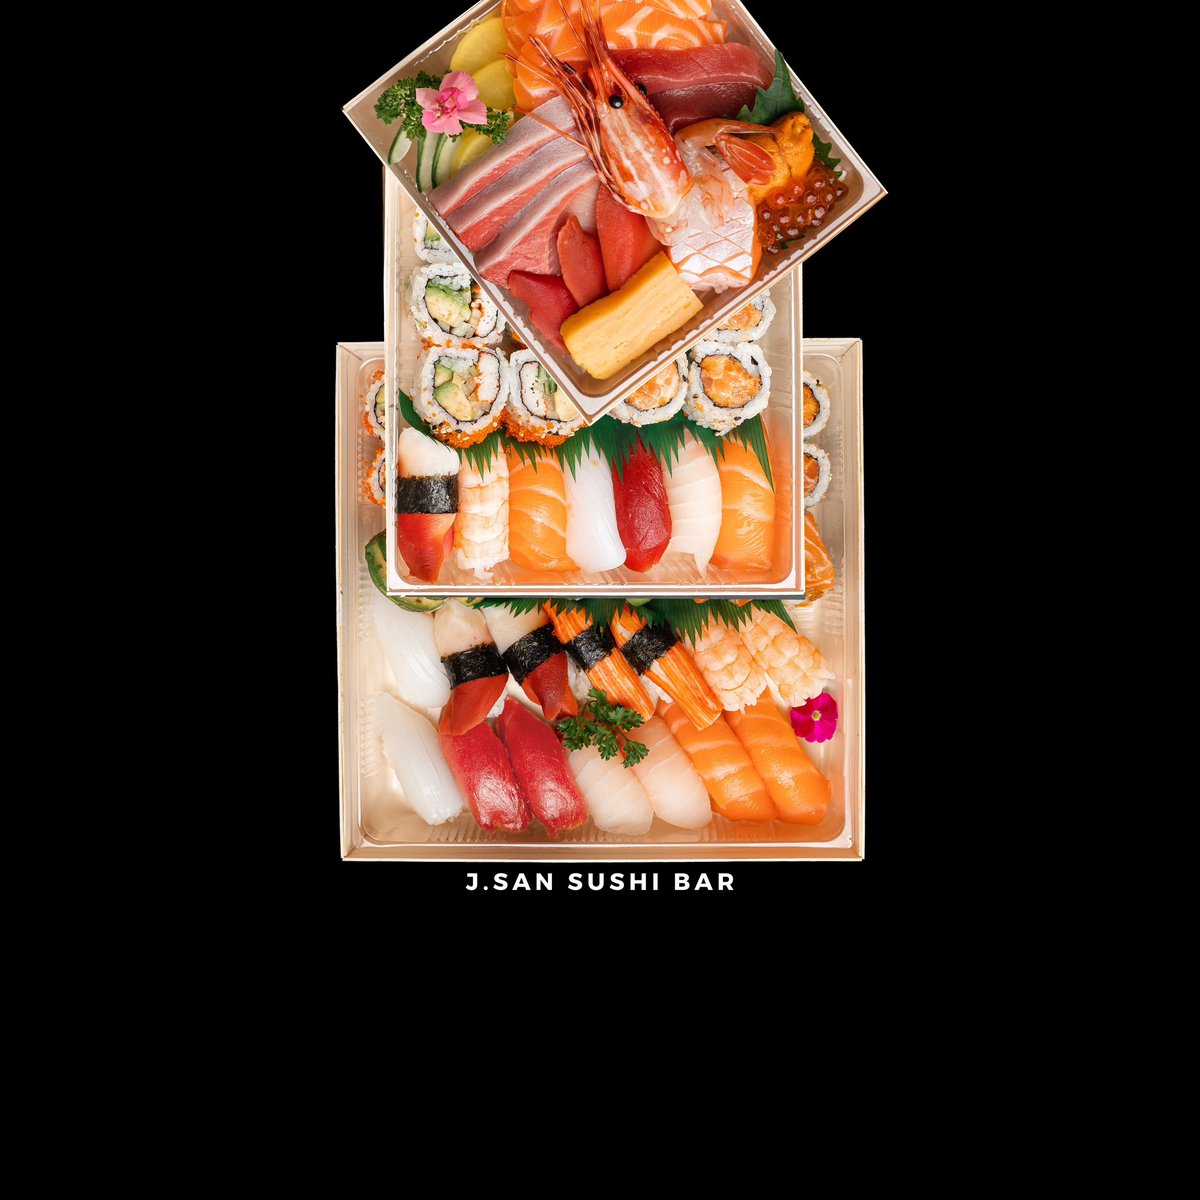 Spring has sprung 🌱 enjoy the freshness and delicious sushi and sashimi feast today @jsansushibar 🍣 #eastercoming 🎀🐣

🍣 Order now : jsansushibar.ca

📍J San Sushi Bar (on Jarvis)
Address - 186 Jarvis St, #Toronto
🕚 11AM-9PM
🐣We Are Open Easter Holidays~